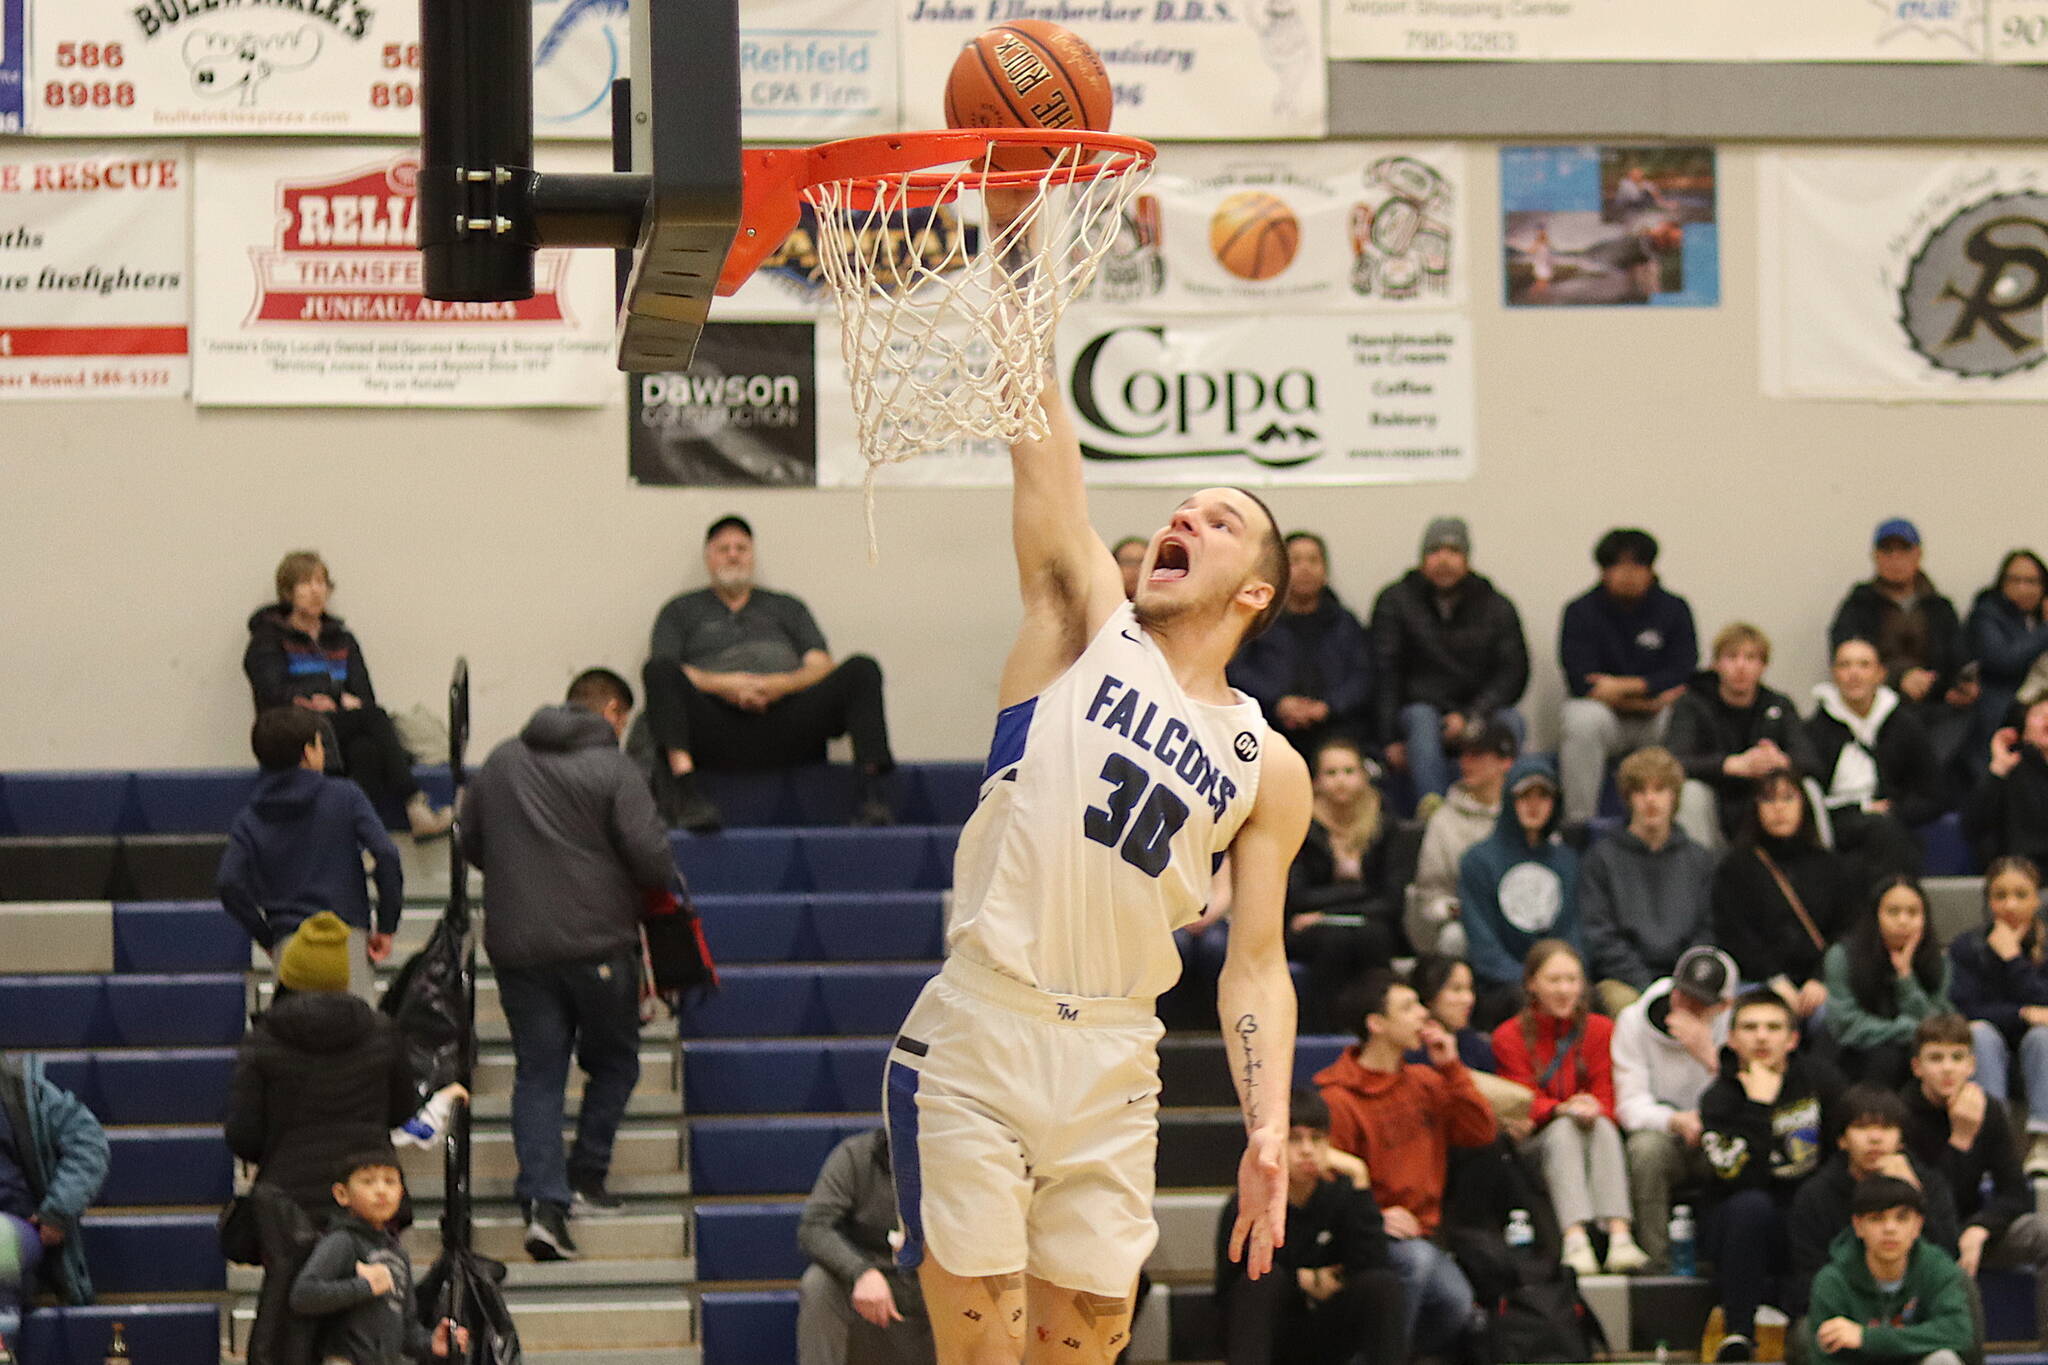 Thomas Baxter scores on a breakaway dunk for Thunder Mountain High School during Saturday’s game against Sitka High School at TMHS. (Mark Sabbatini / Juneau Empire)